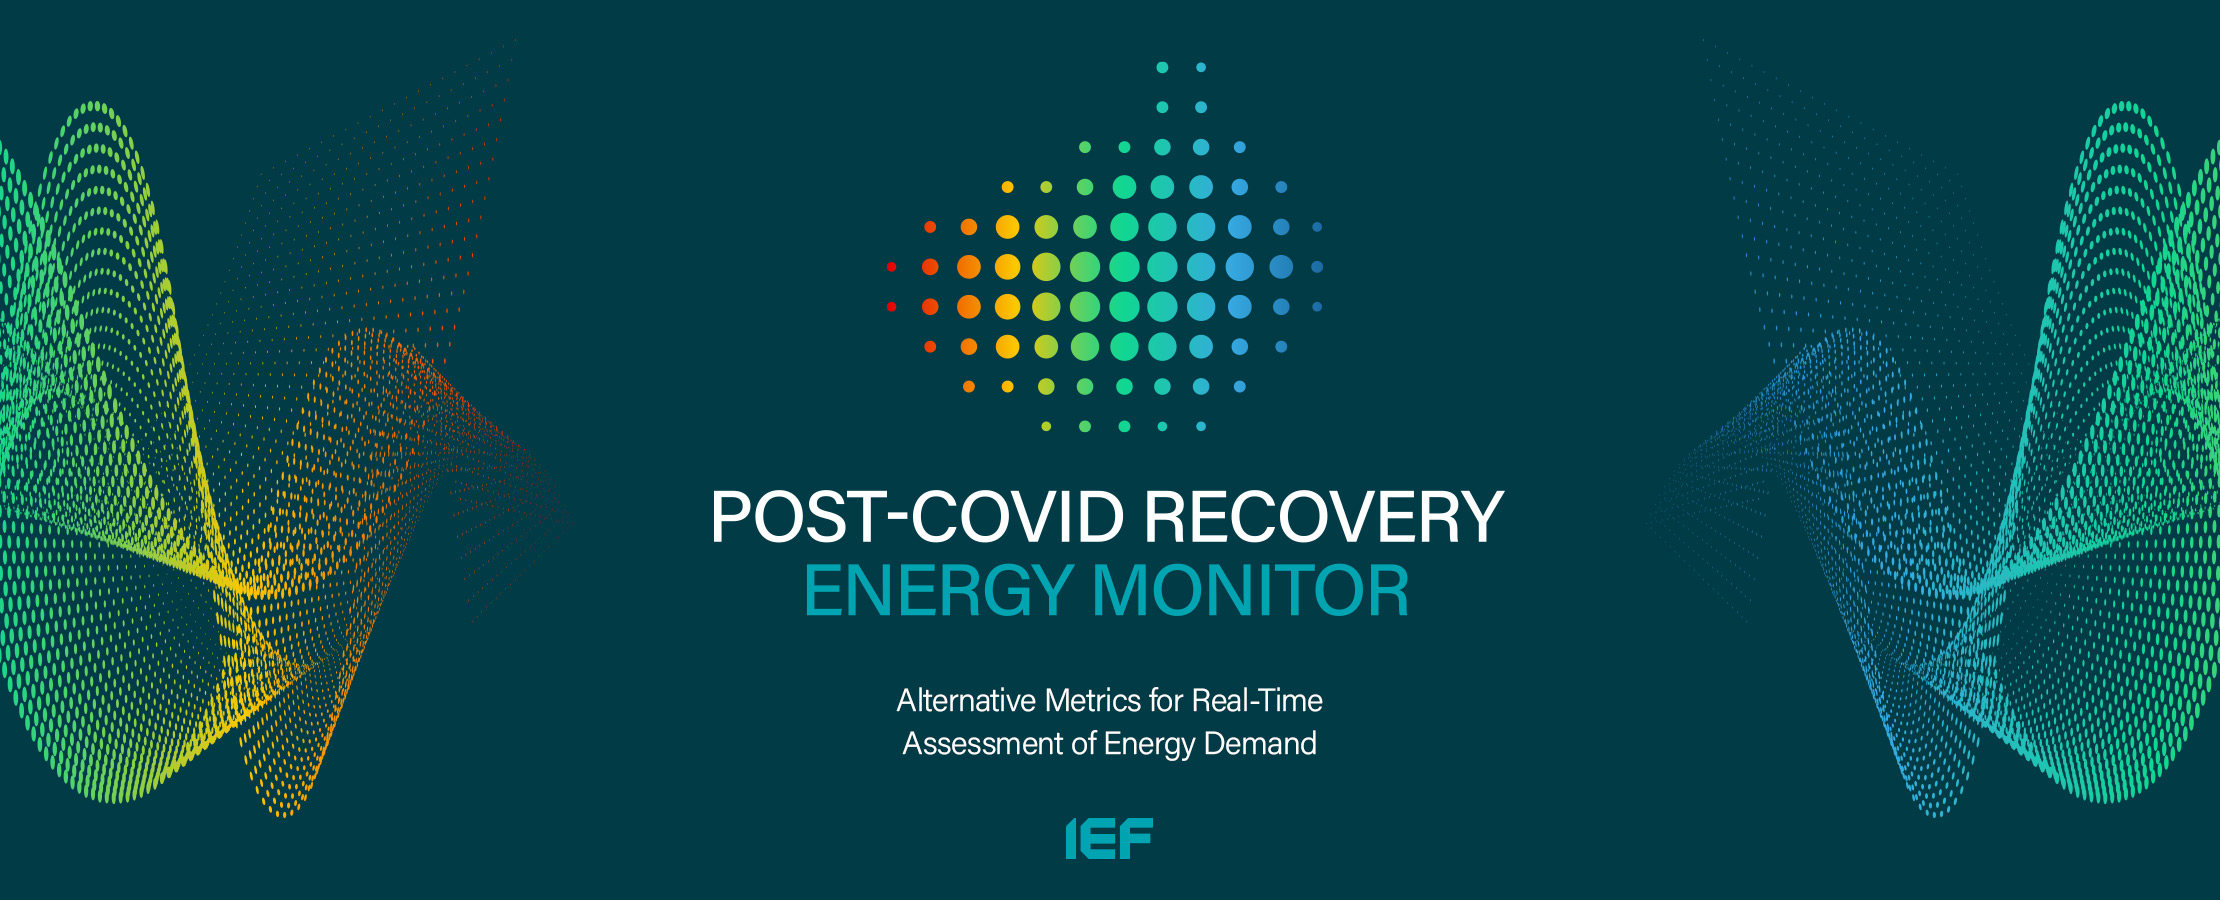 Post-COVID Recovery Energy Monitor - Alternative Metrics for Real-Time Assessment of Energy Demand